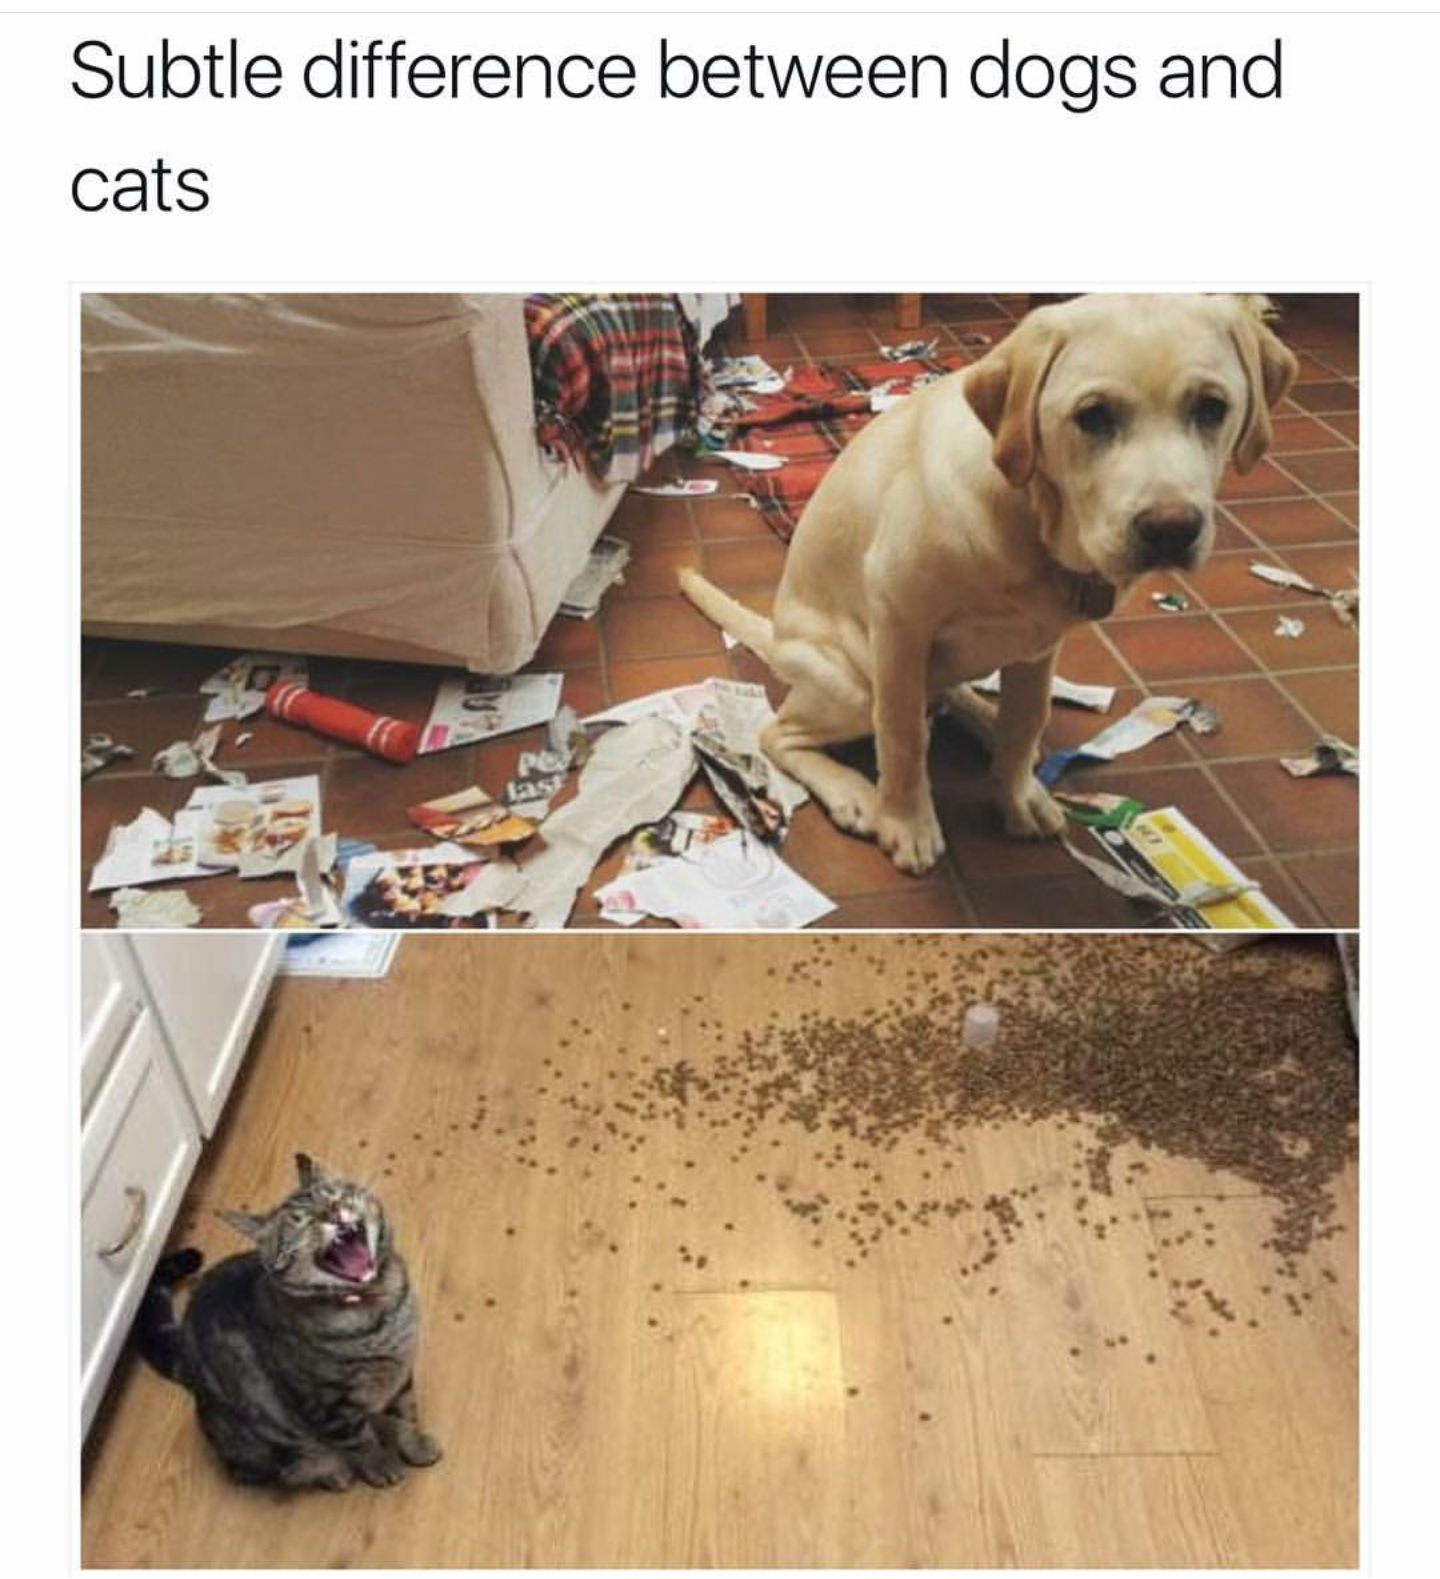 destructive dog - Subtle difference between dogs and cats